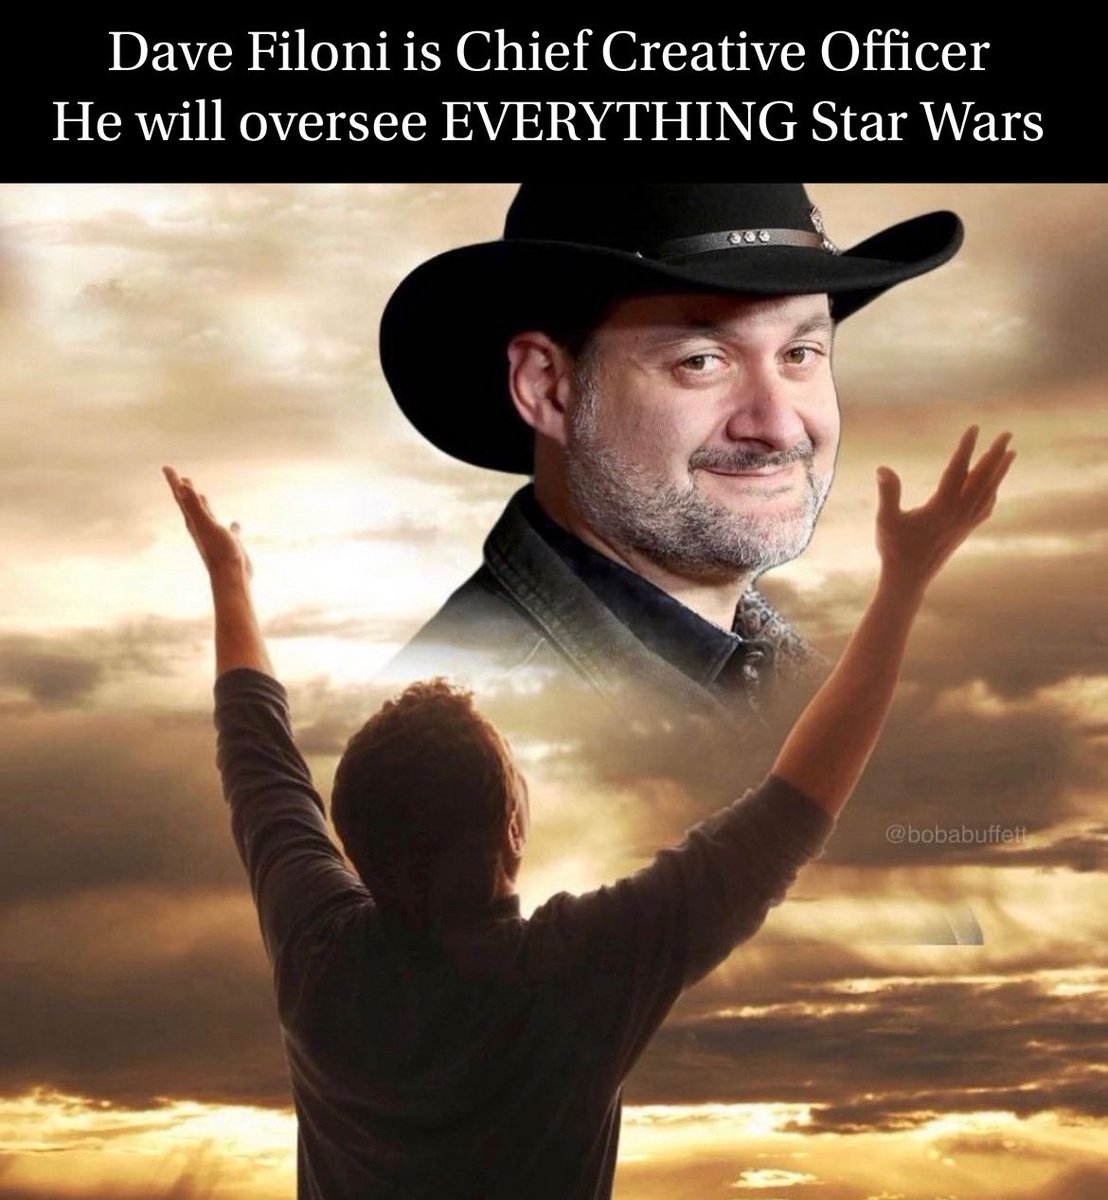 Is this good or bad news? 🤔
#StarWars #DaveFiloni #lucasfilm